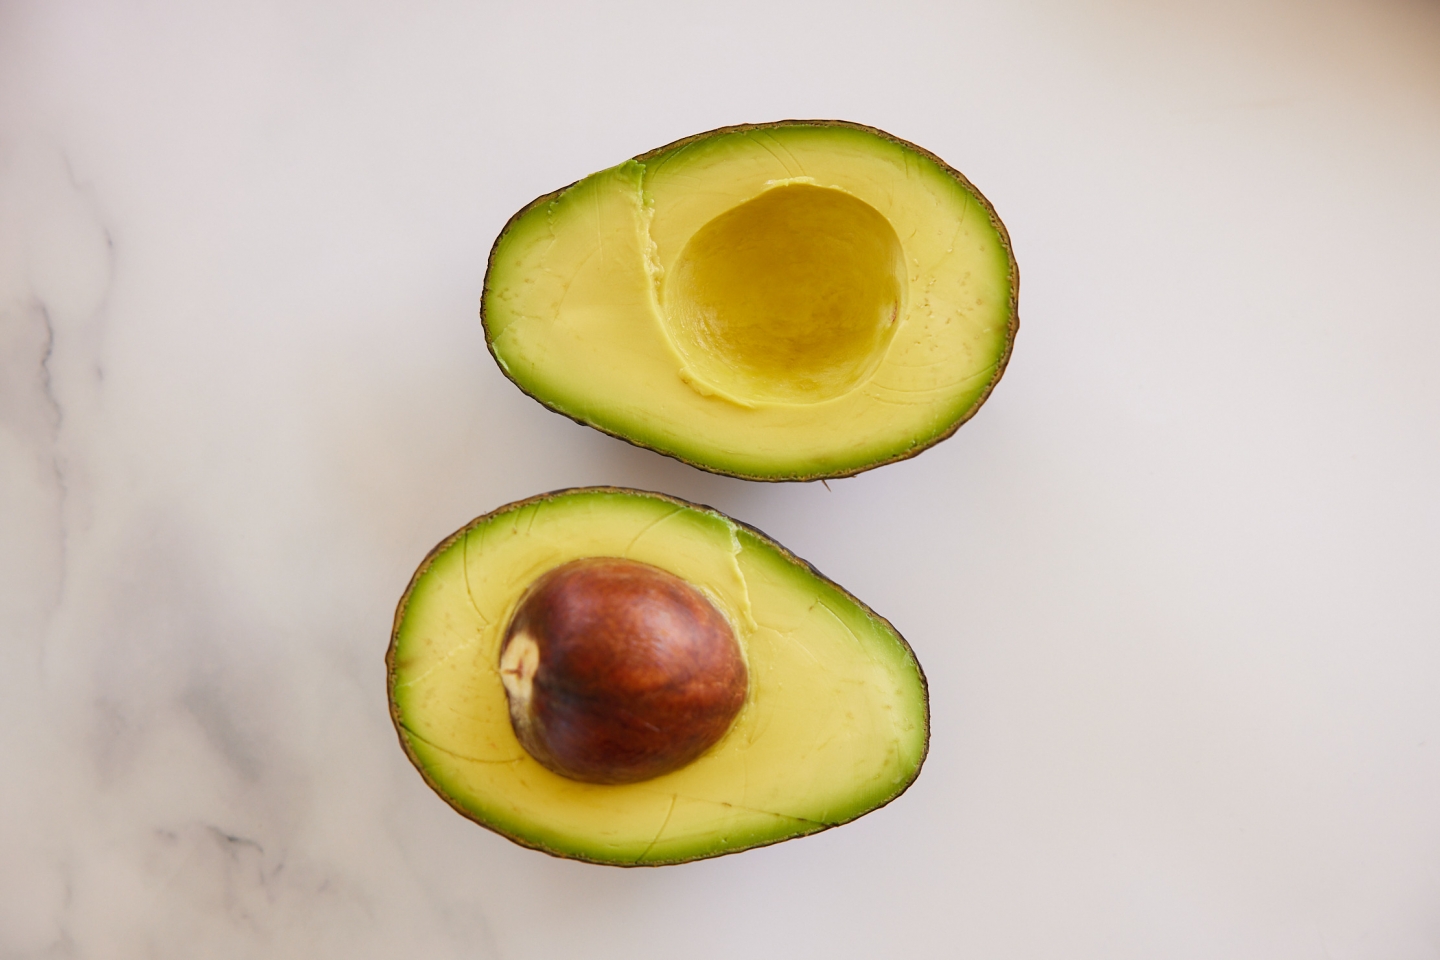 How To Keep Avocados Fresh for Days: 8 Hacks for Avocado Lovers